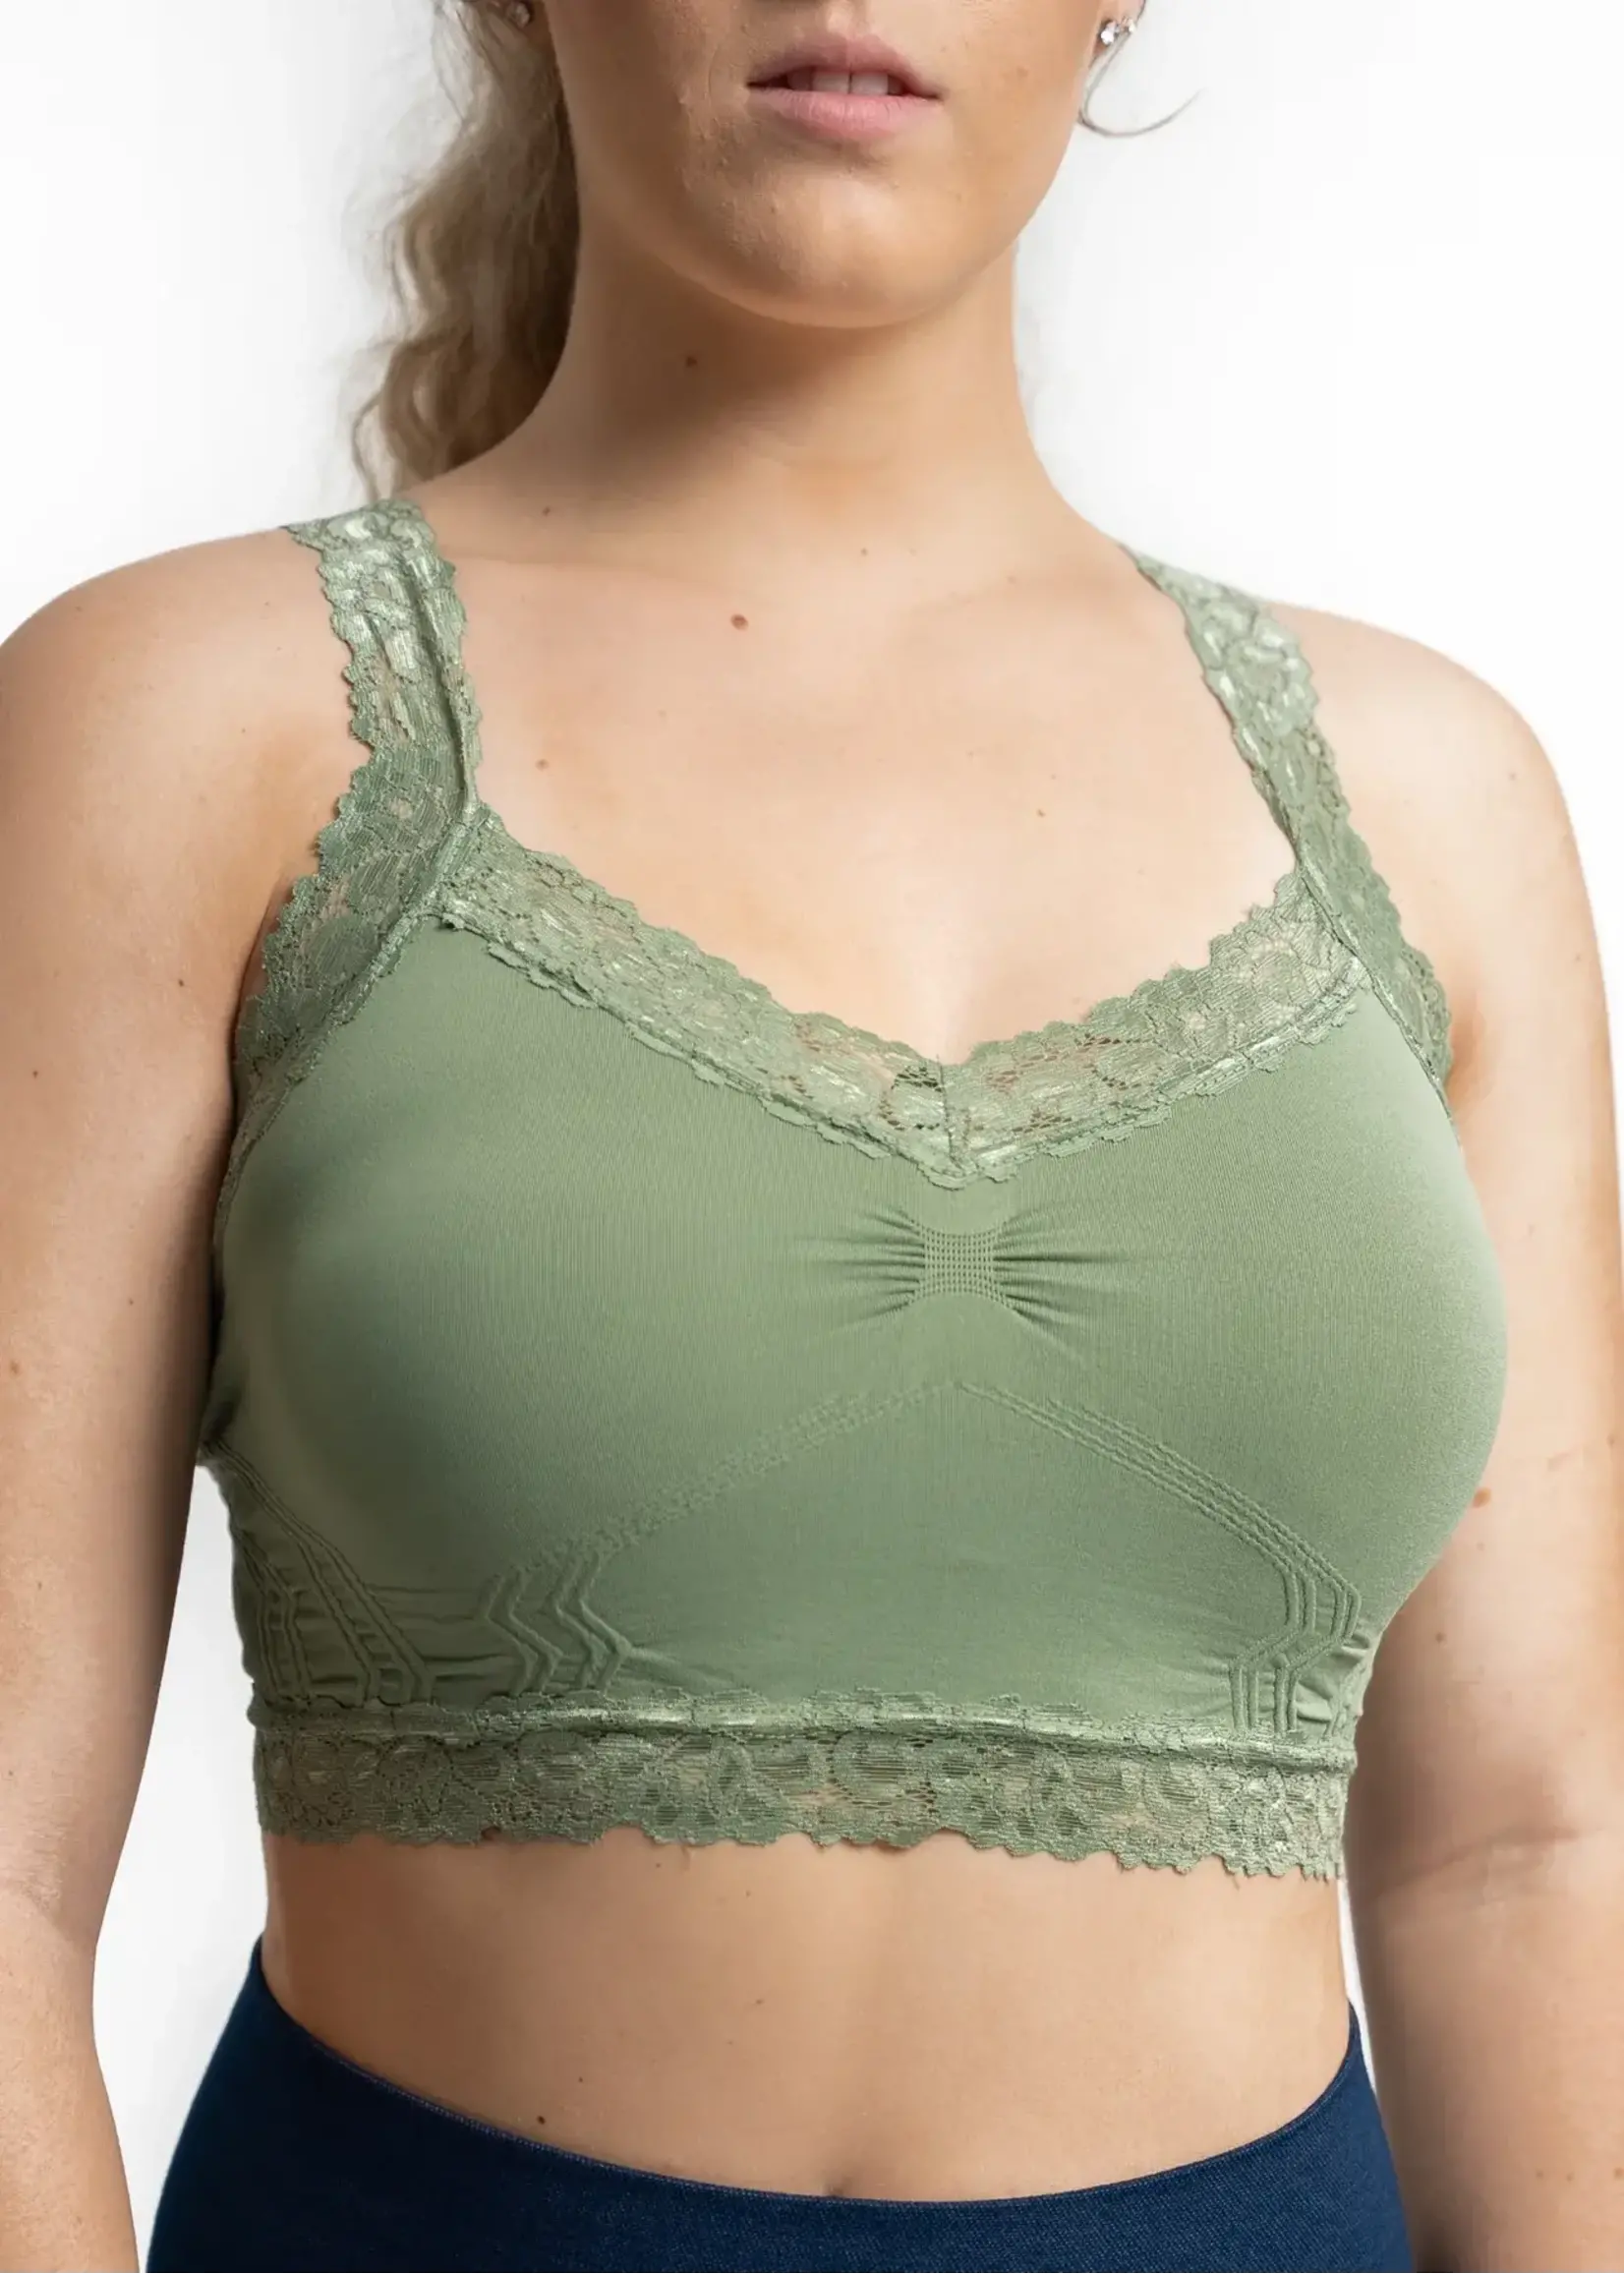 knotty padded strapless bralette in sage green – Our Bralette Club